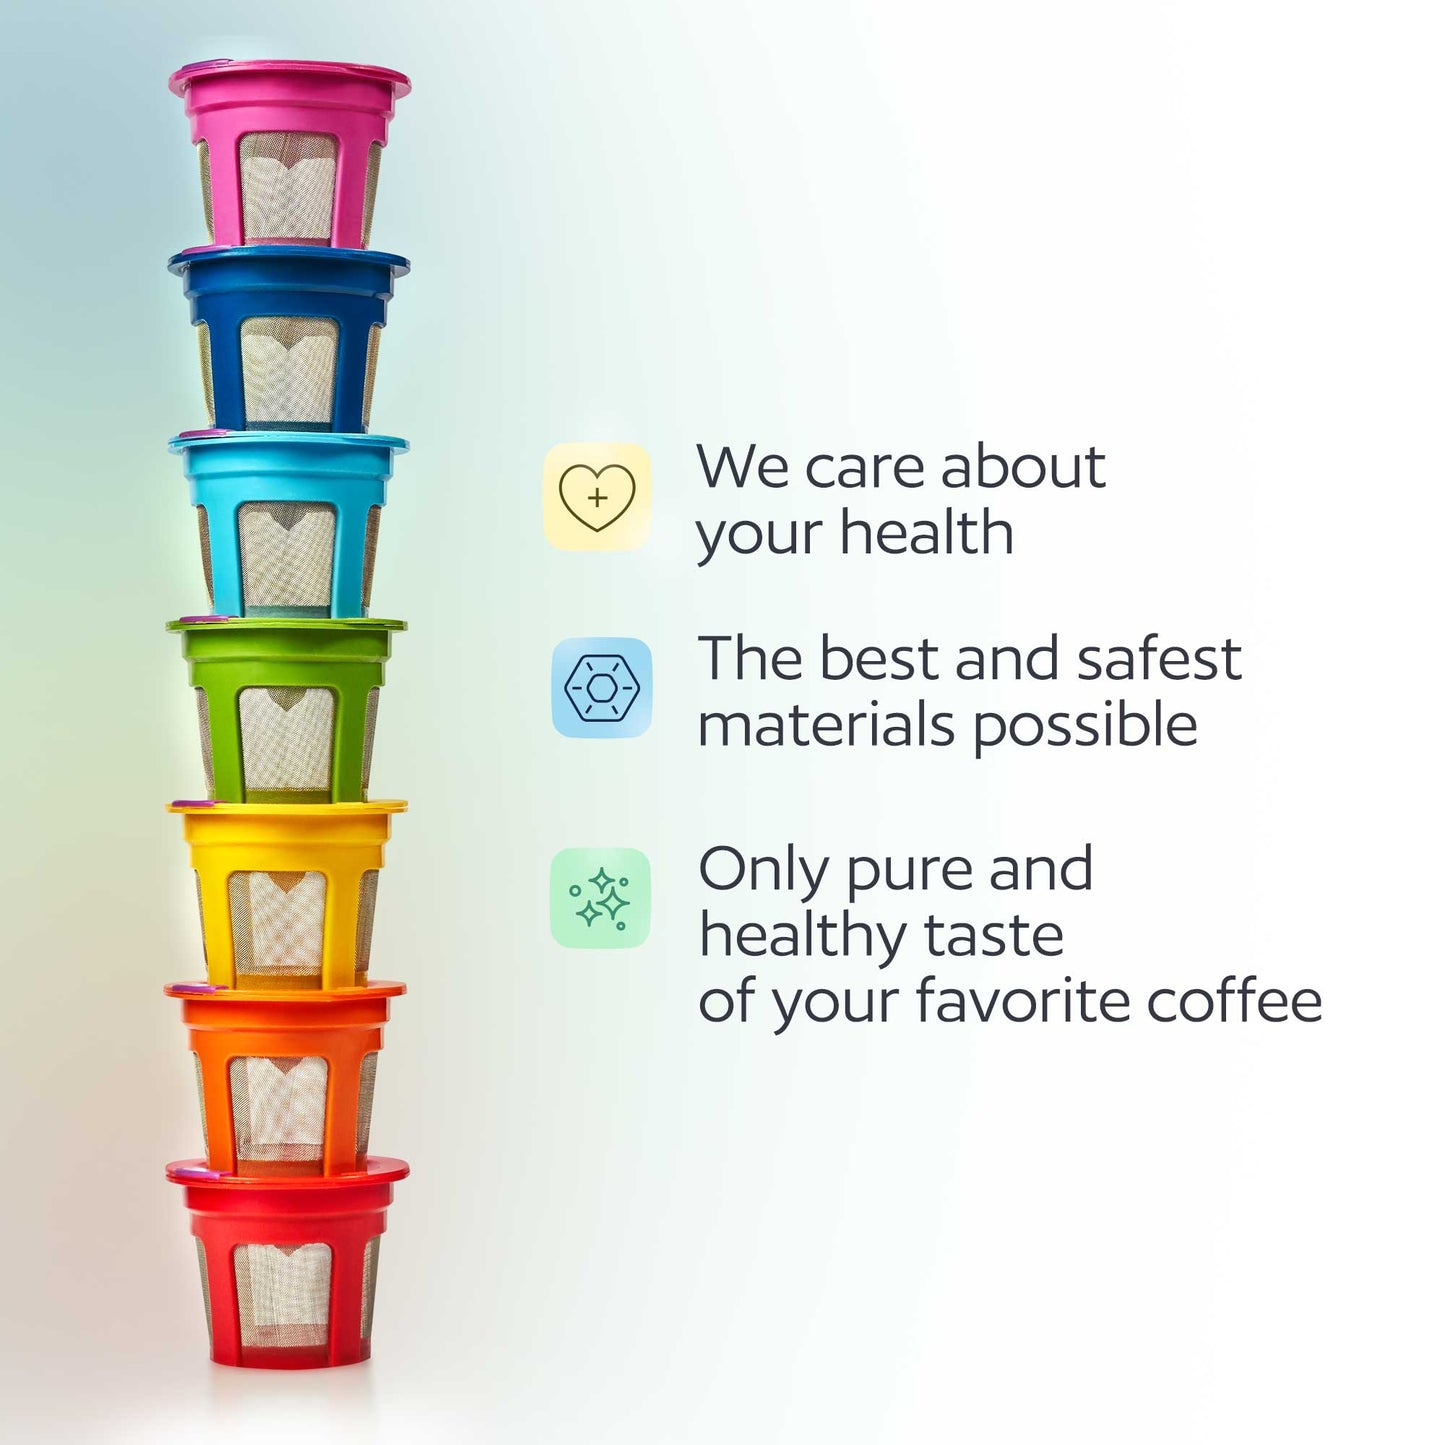 7 Reusable K Cups for Keurig - Universal Fit 1.0 & 2.0 Keurig Coffee Makers - 7 Colors Refillable Kcups Coffee Filters for all Keurig Brewers Family